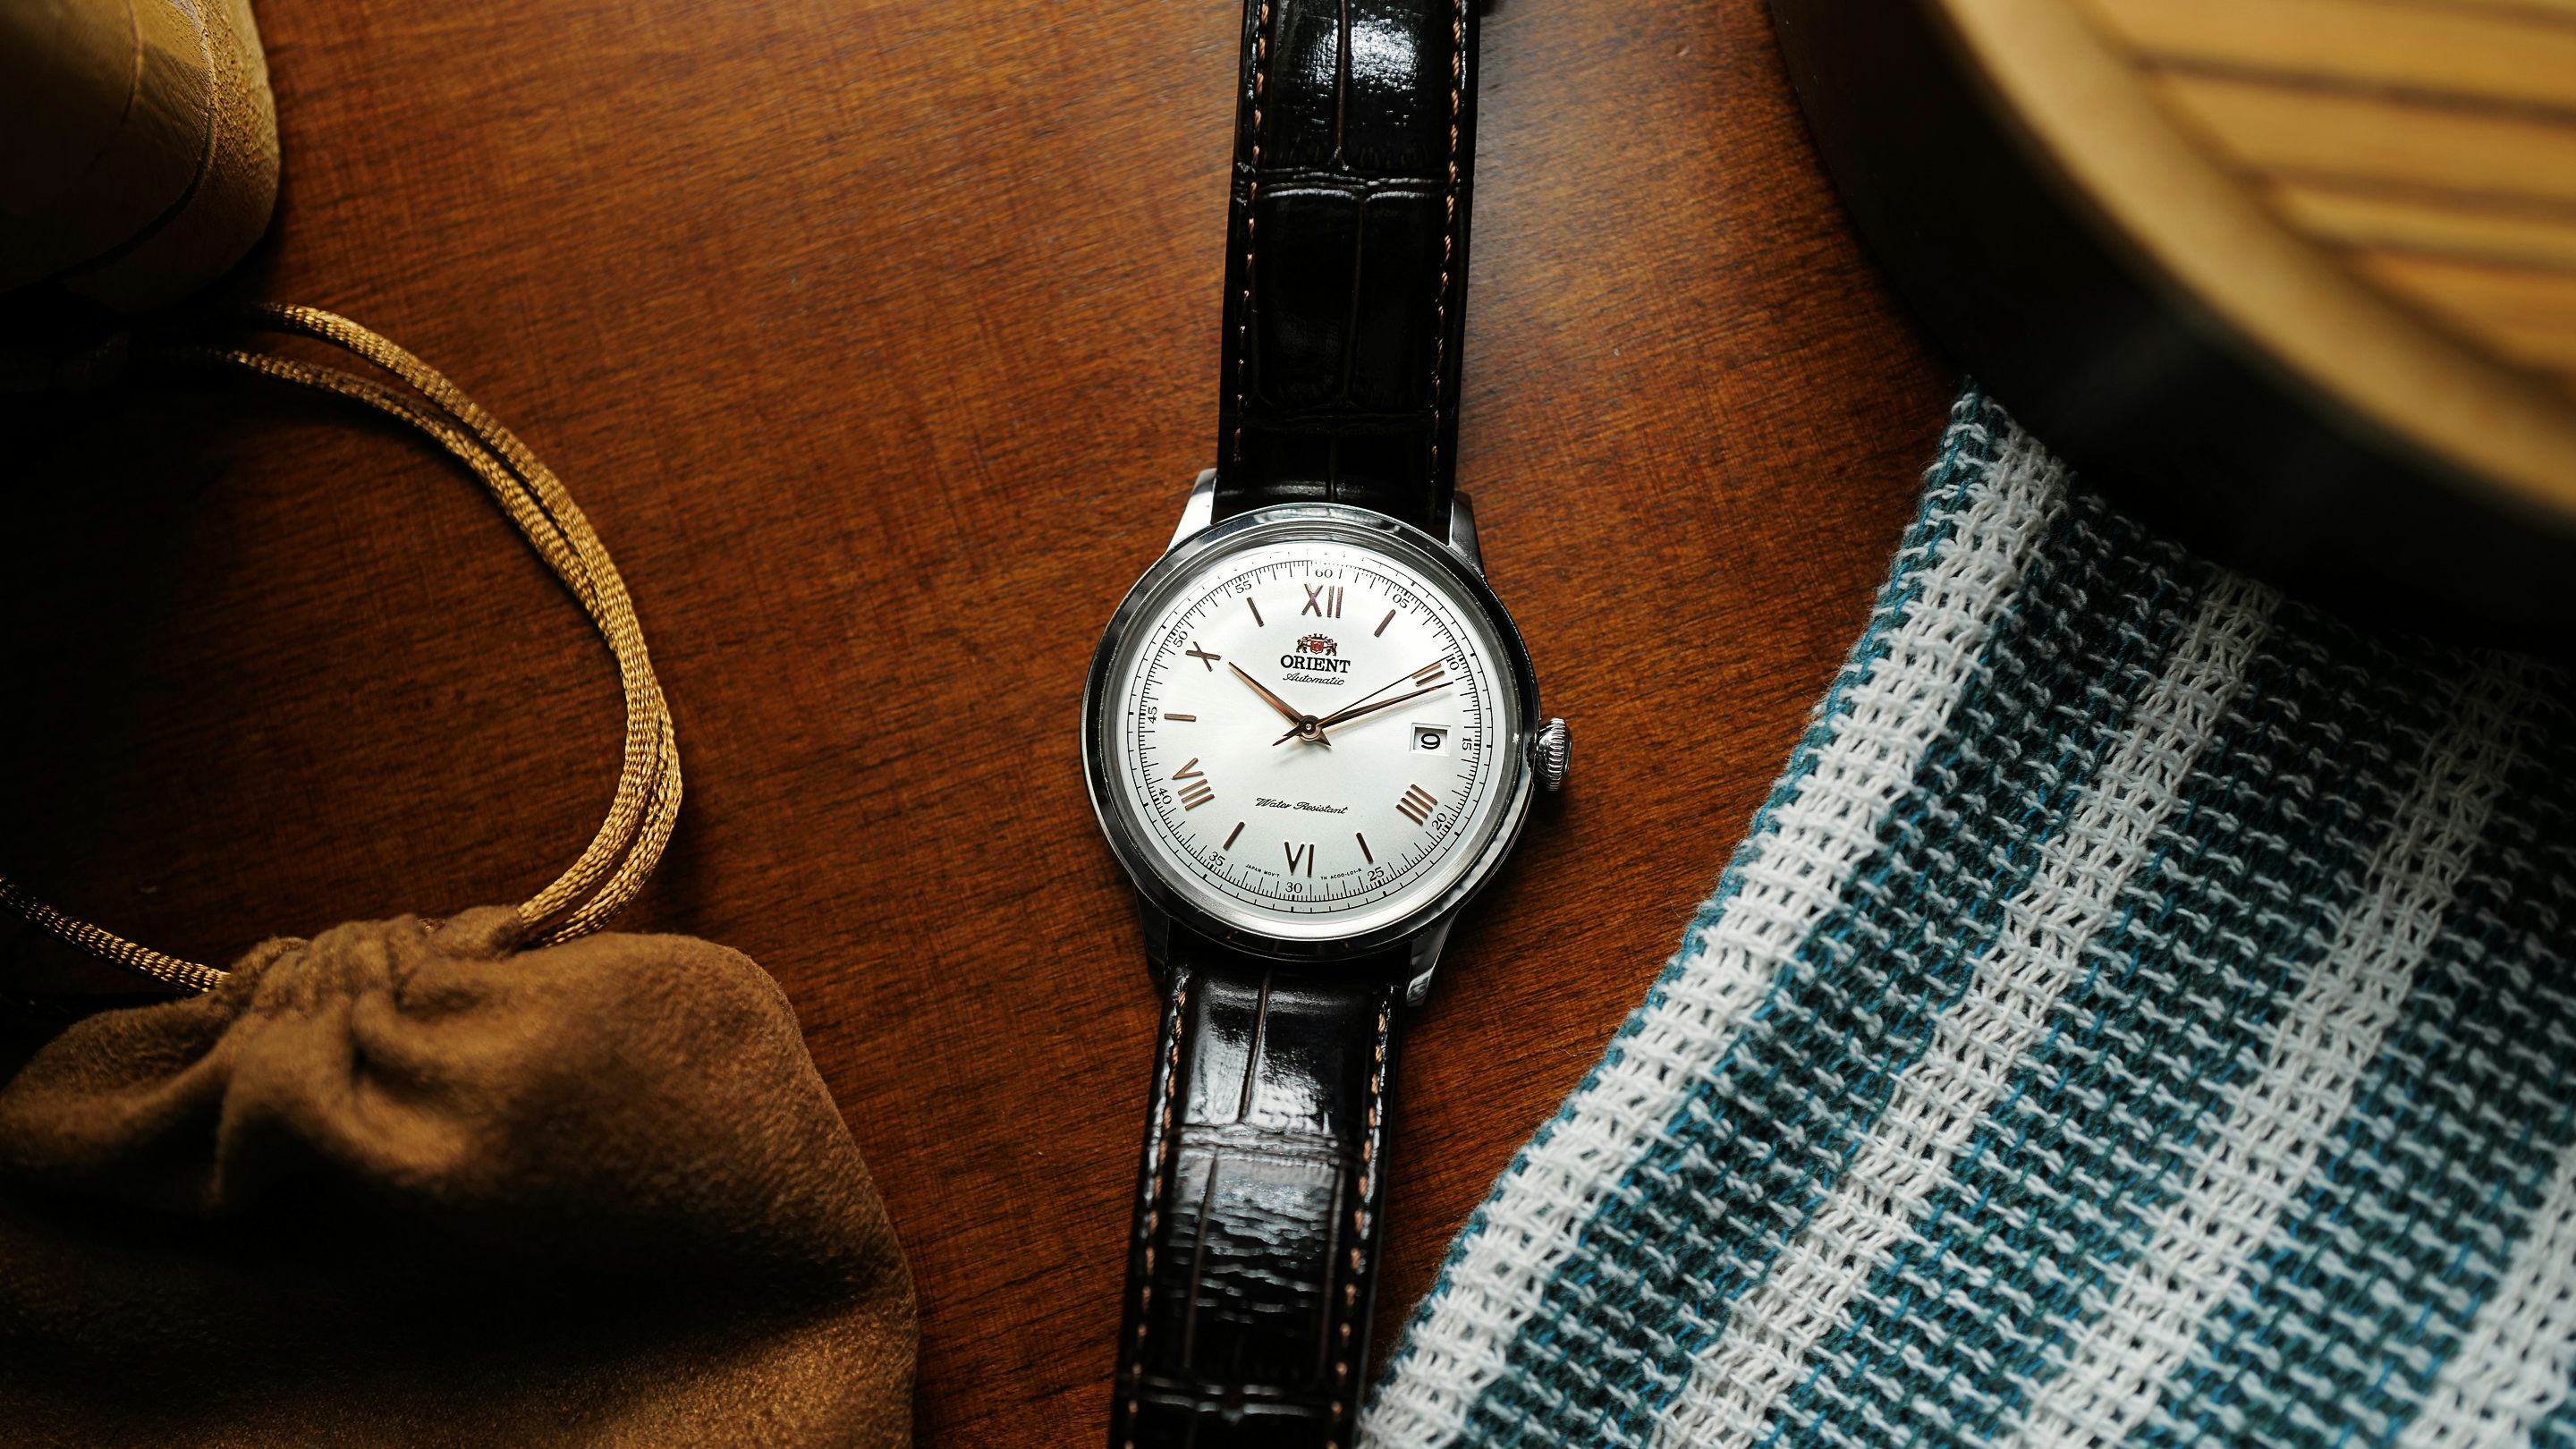 Orient Watch on X: Keeping track of time in style. The only way